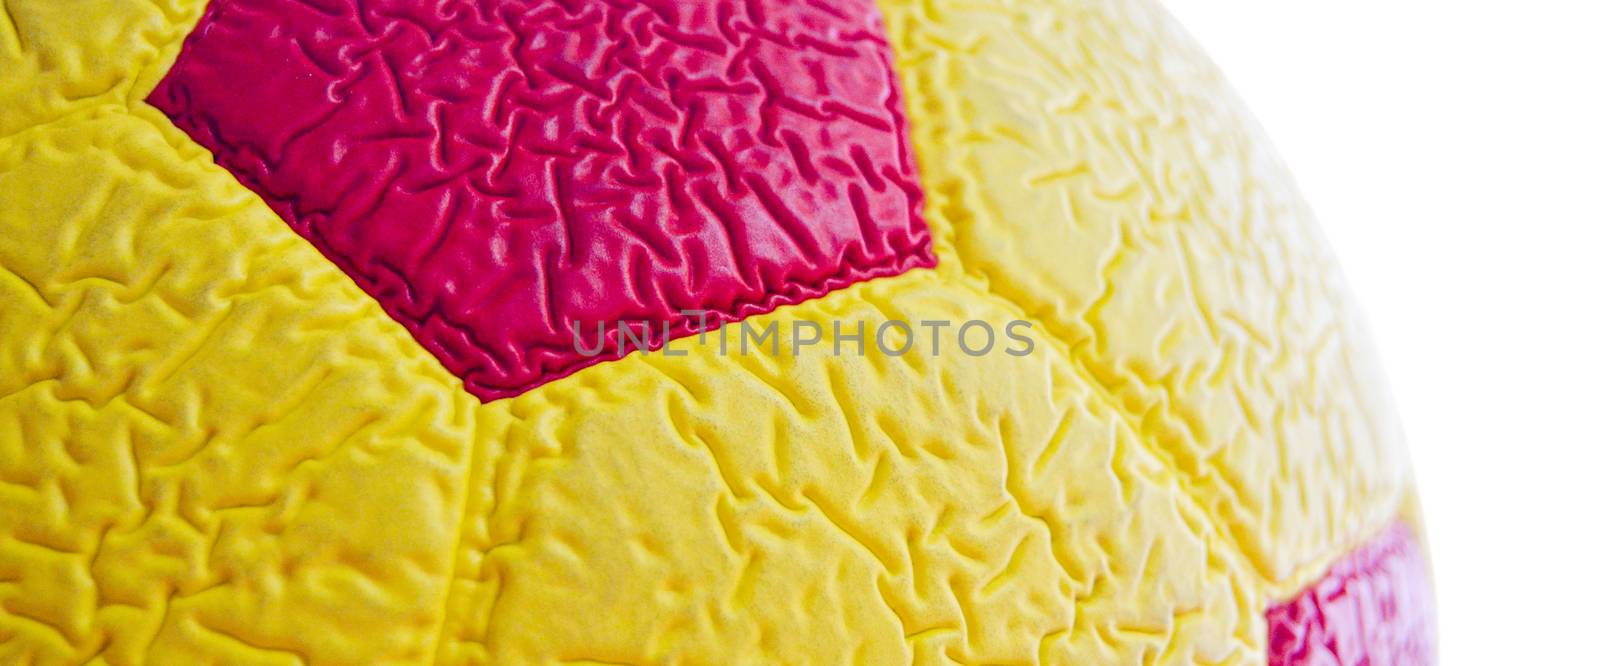 picture of a Red and yellow Soccer Ball macro, texture